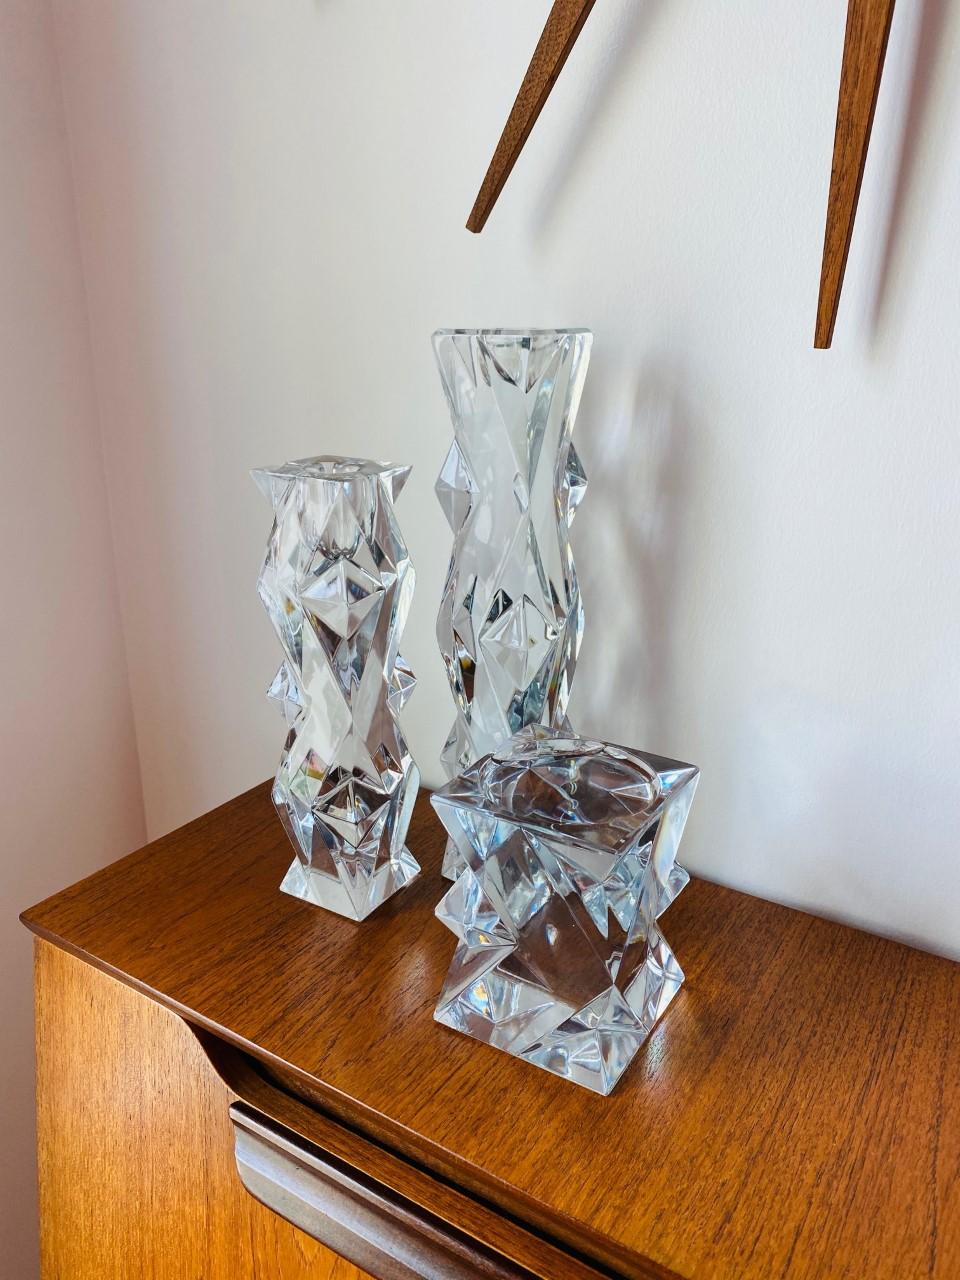 Post-Modern Vintage Stylized Lead Crystal Candle Holder Set of 3 by Libera Czech